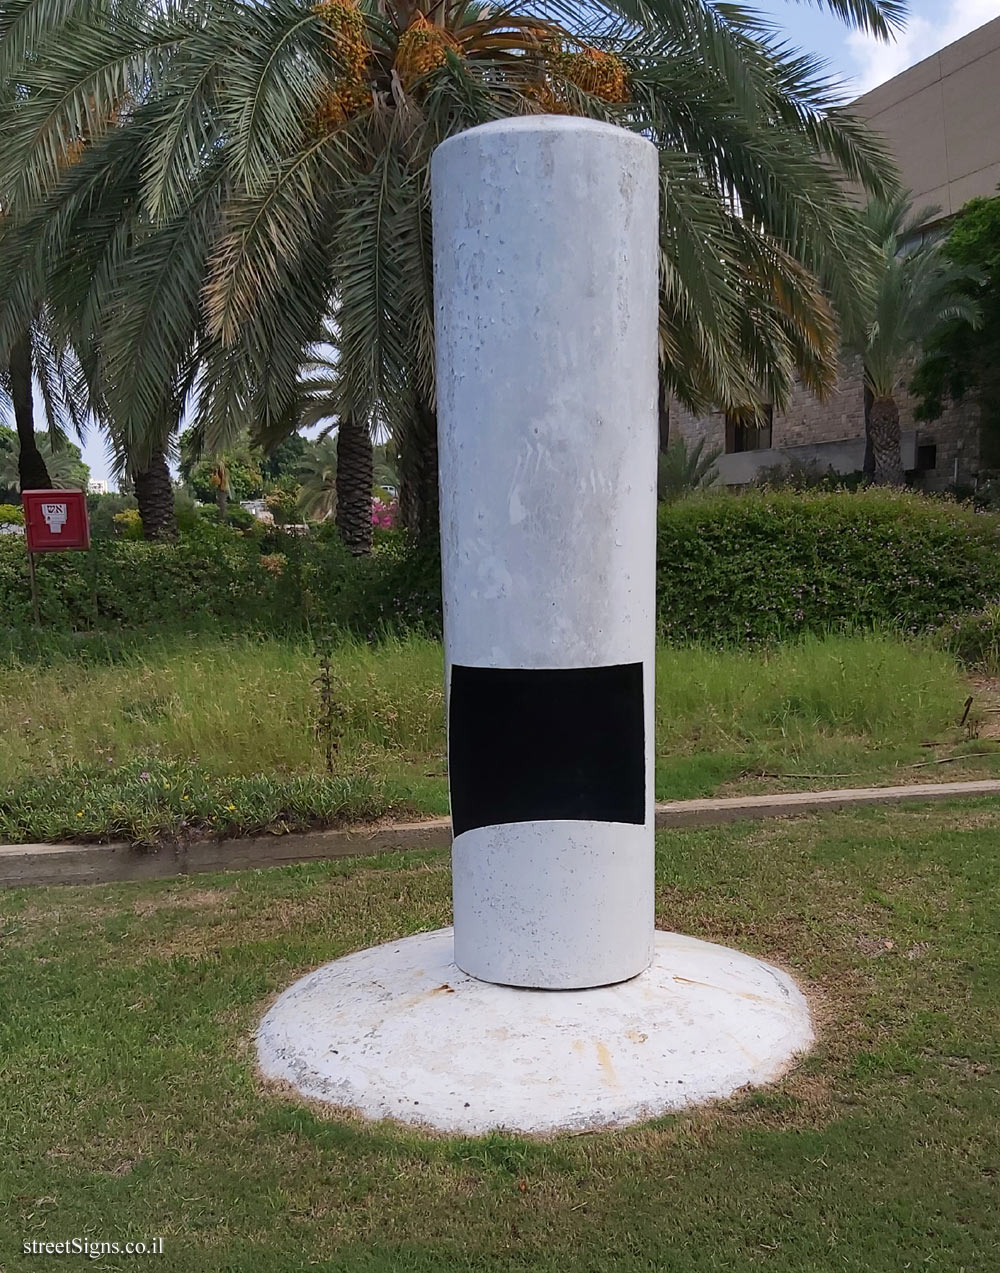 To the Victims of the Sea" - outdoor sculpture by Michael Gross - Tel Aviv University, Tel Aviv-Yafo, Israel